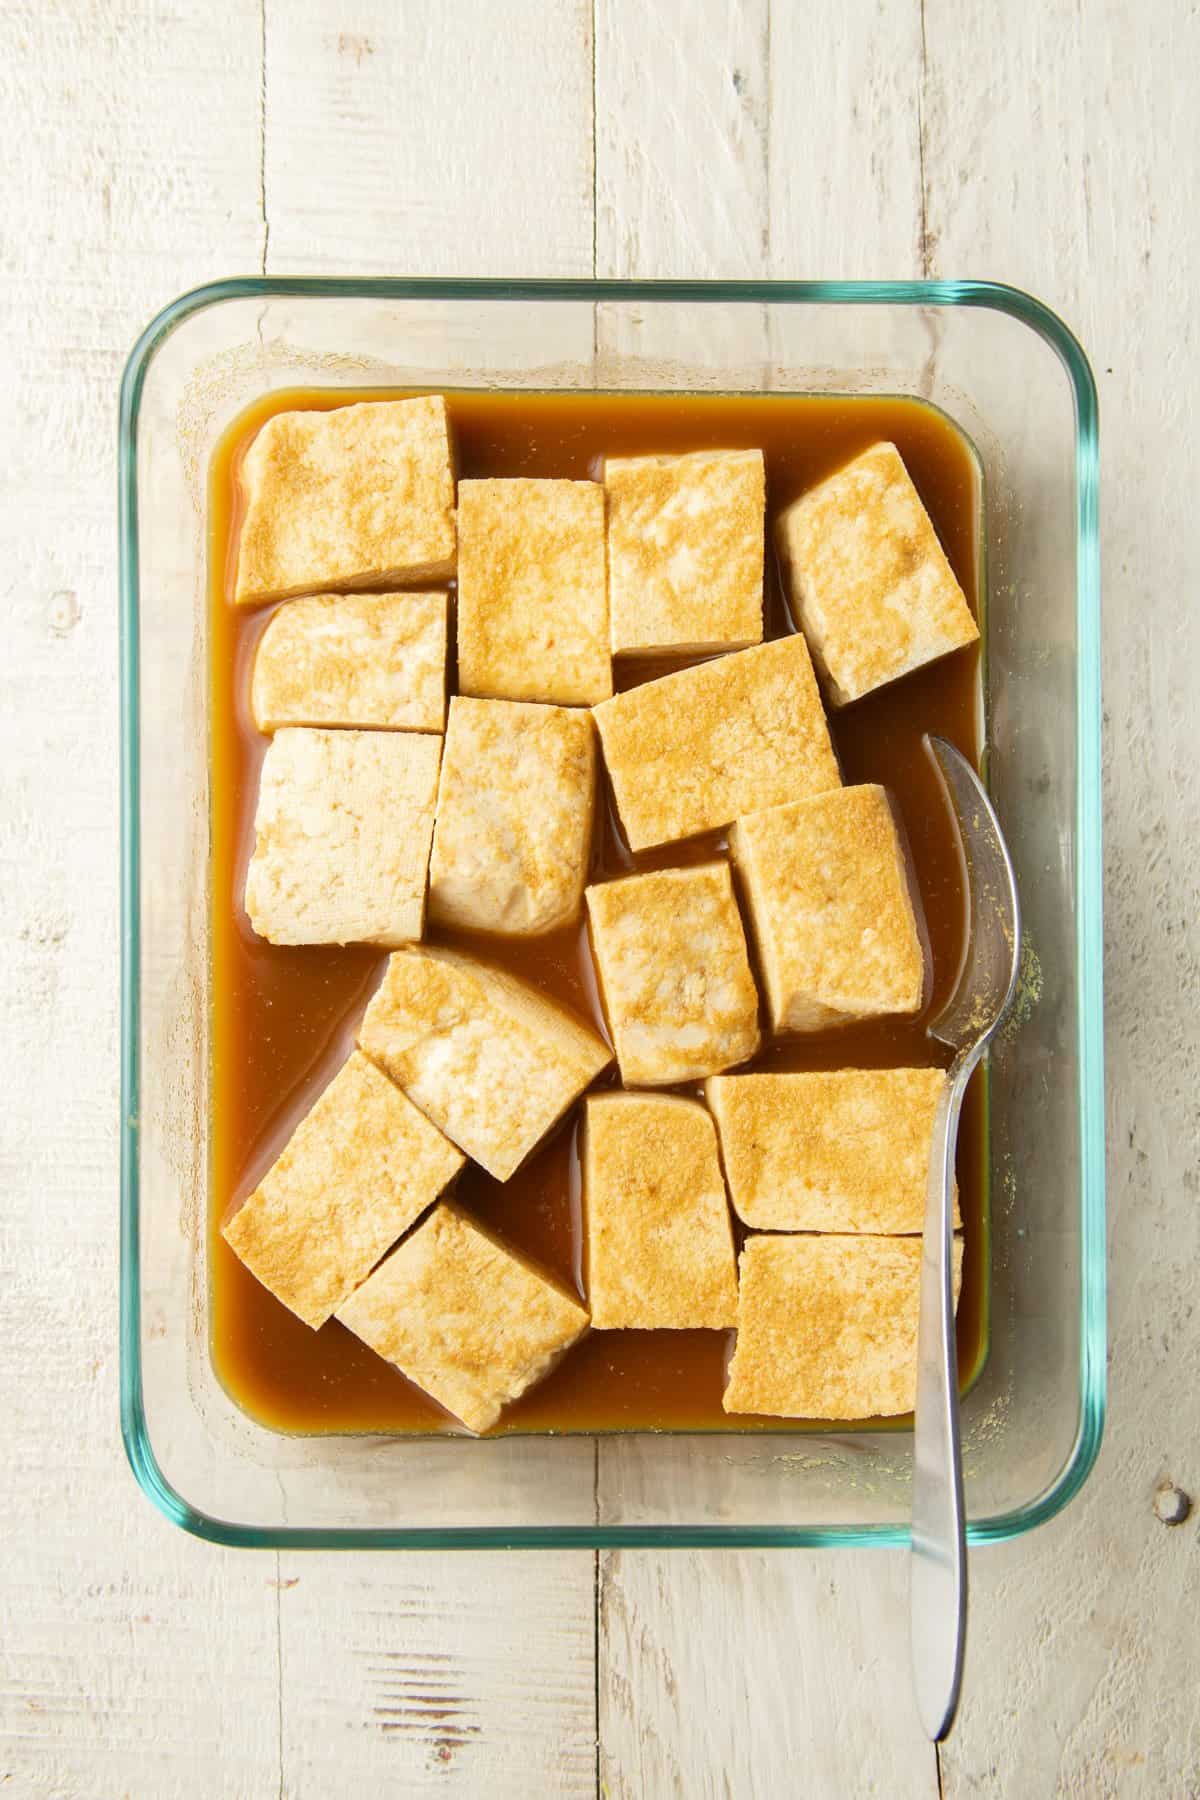 Tofu pieces in a dish marinating.